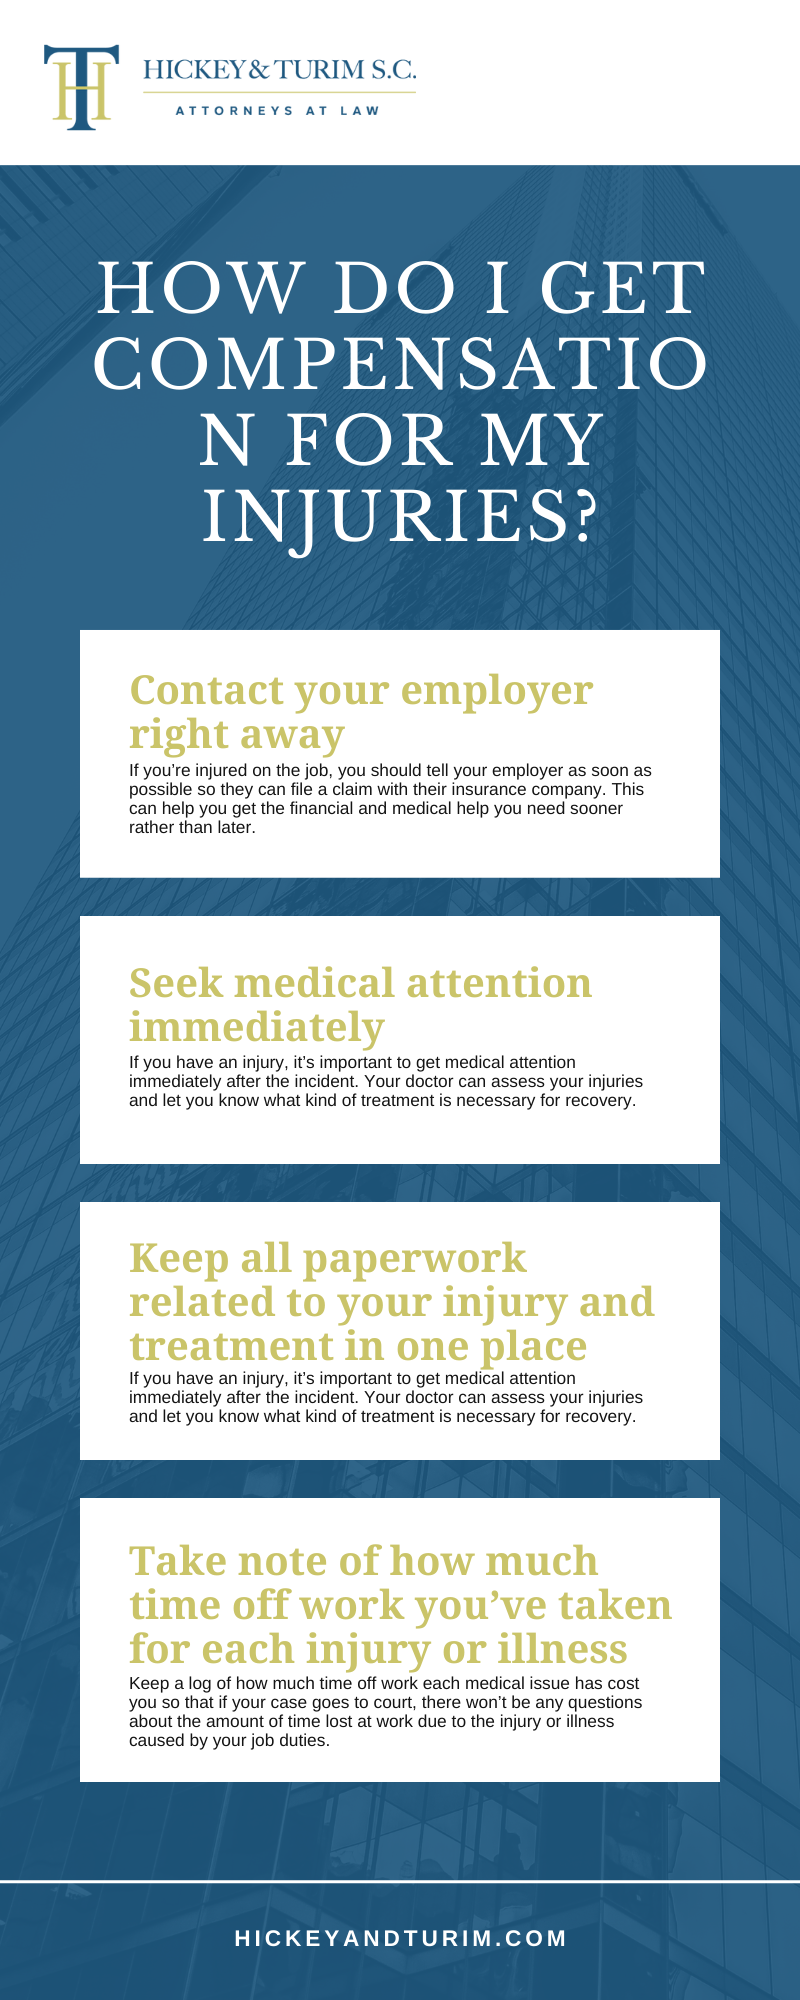 How Do I Get Compensation For My Injuries Infographic